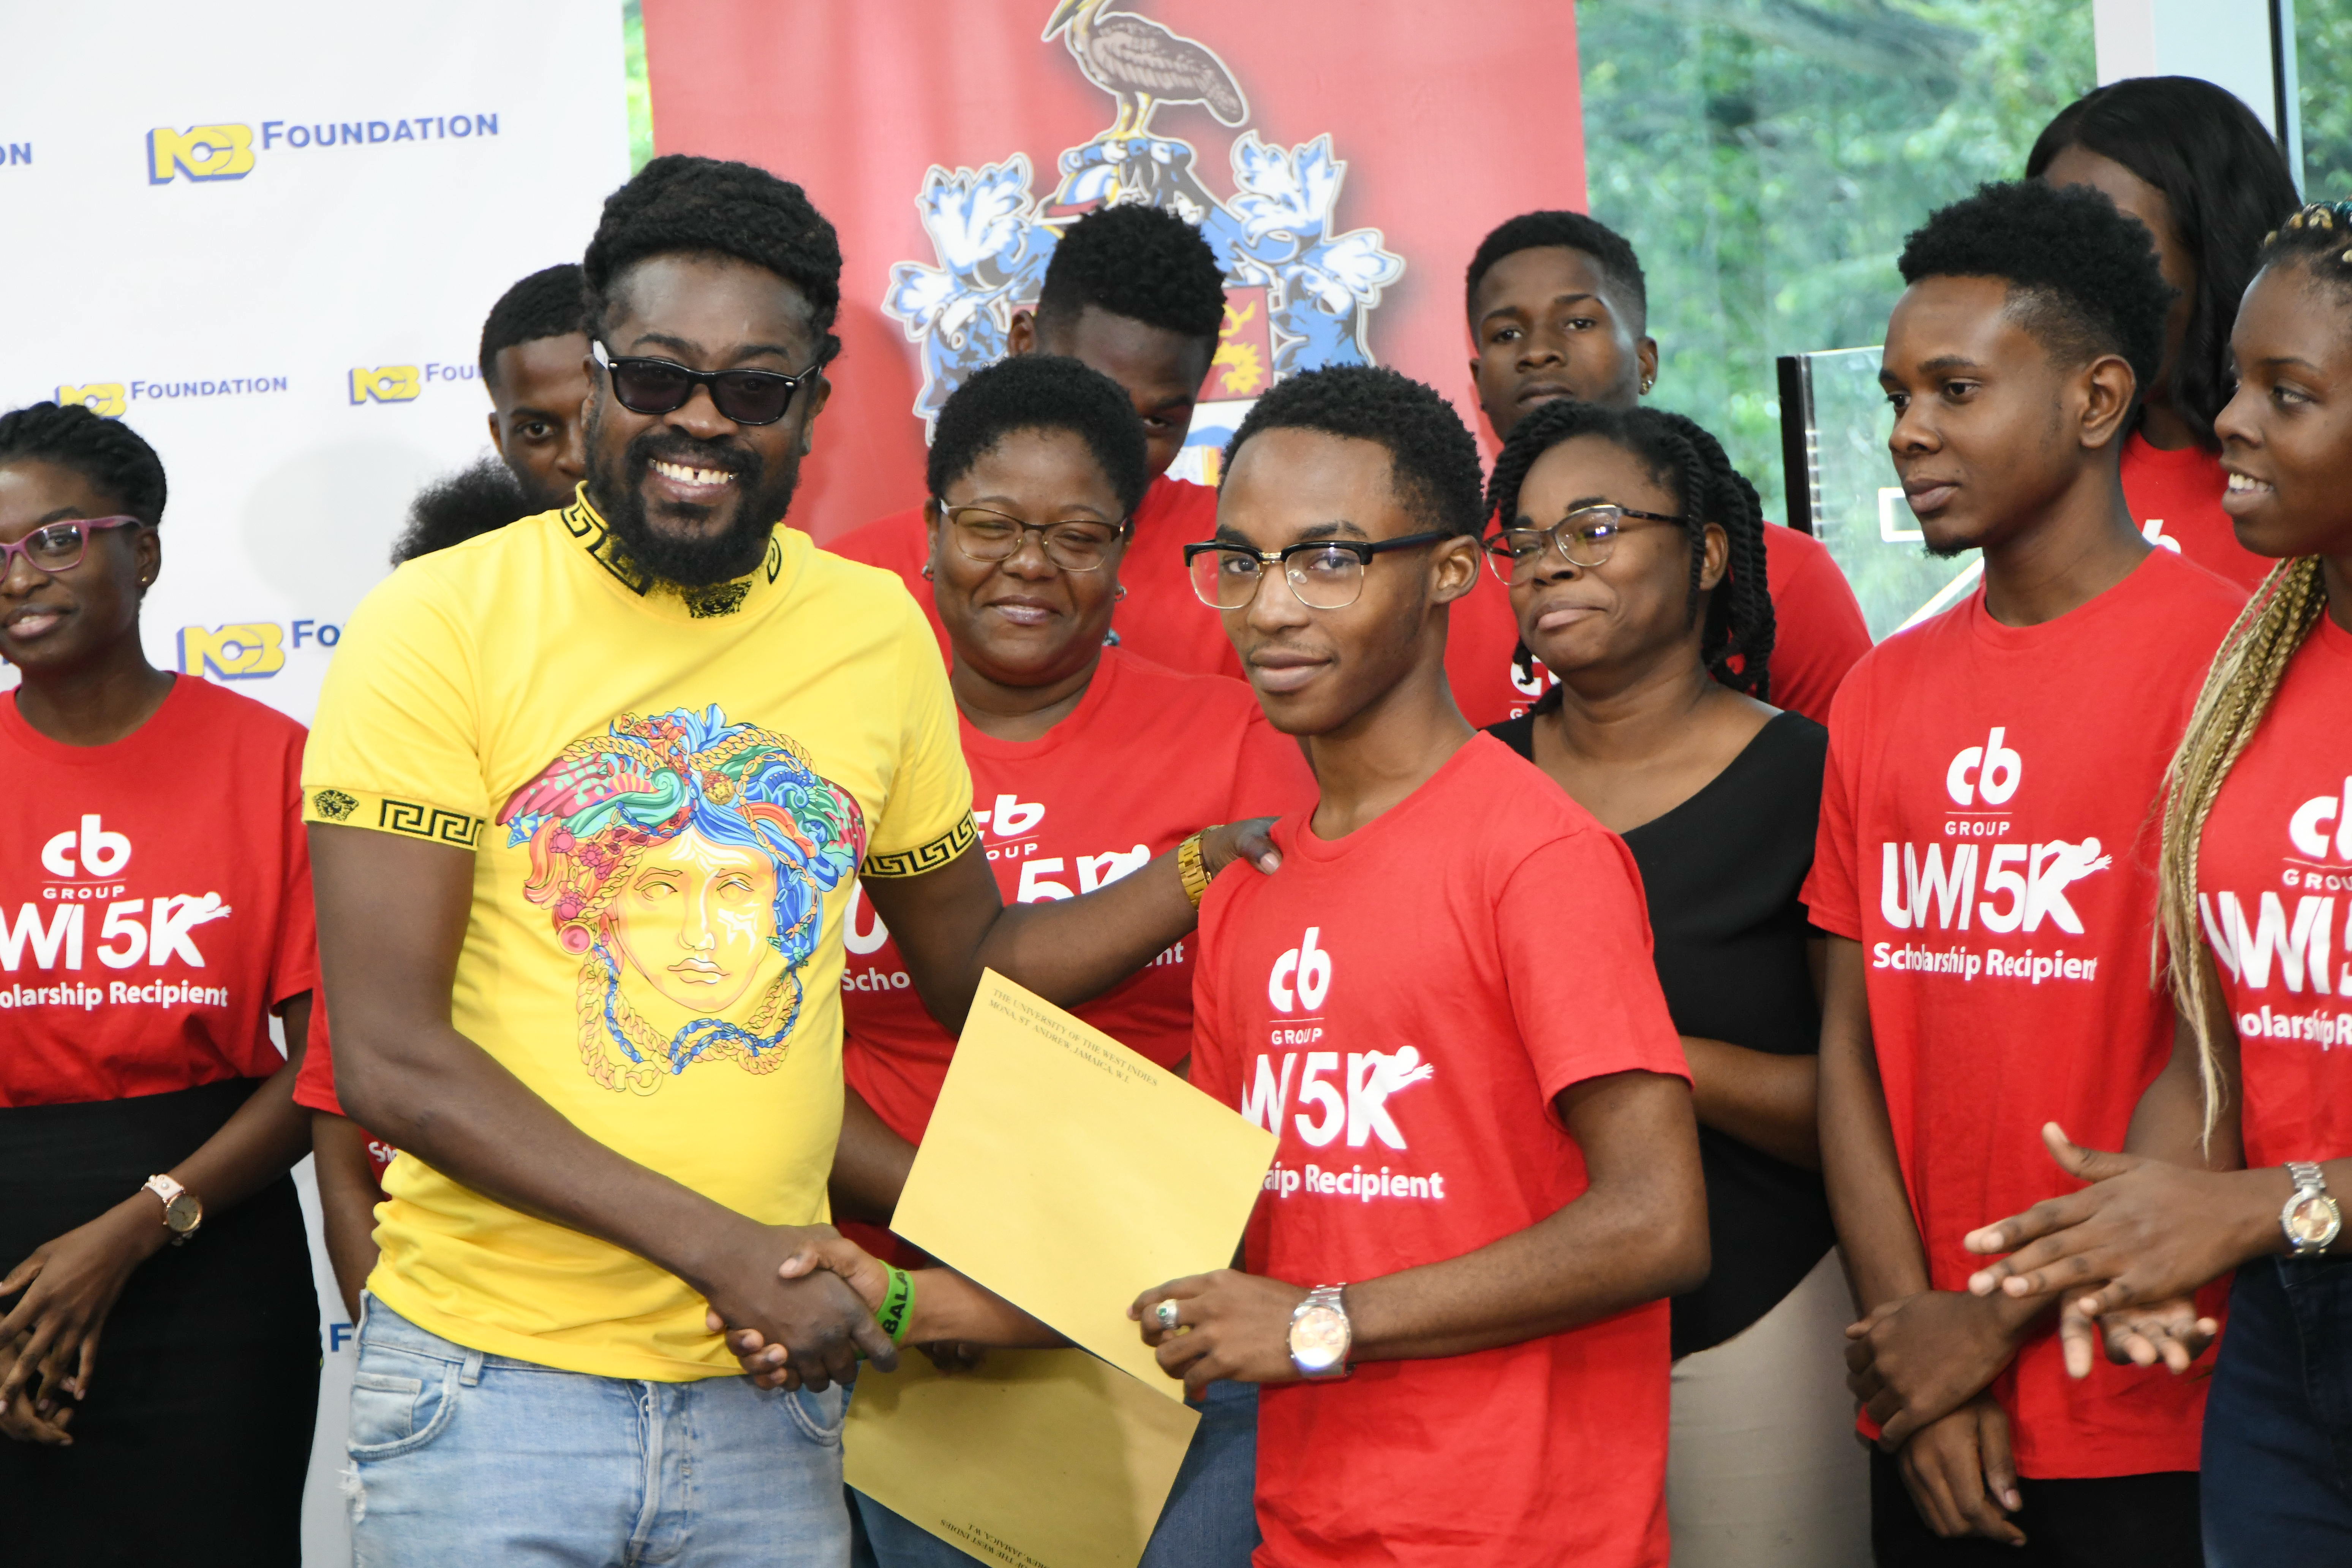 Jhevonte Webster receiving the CB Group UWI 5K/Khadene “Miss Kitty” Hylton Scholarship being presented on her behalf by Moses “Beenie Man” Davis. The presentation took place at the launch of the 5K fund raising event on October 2 at the UWI Regional Headquarters.